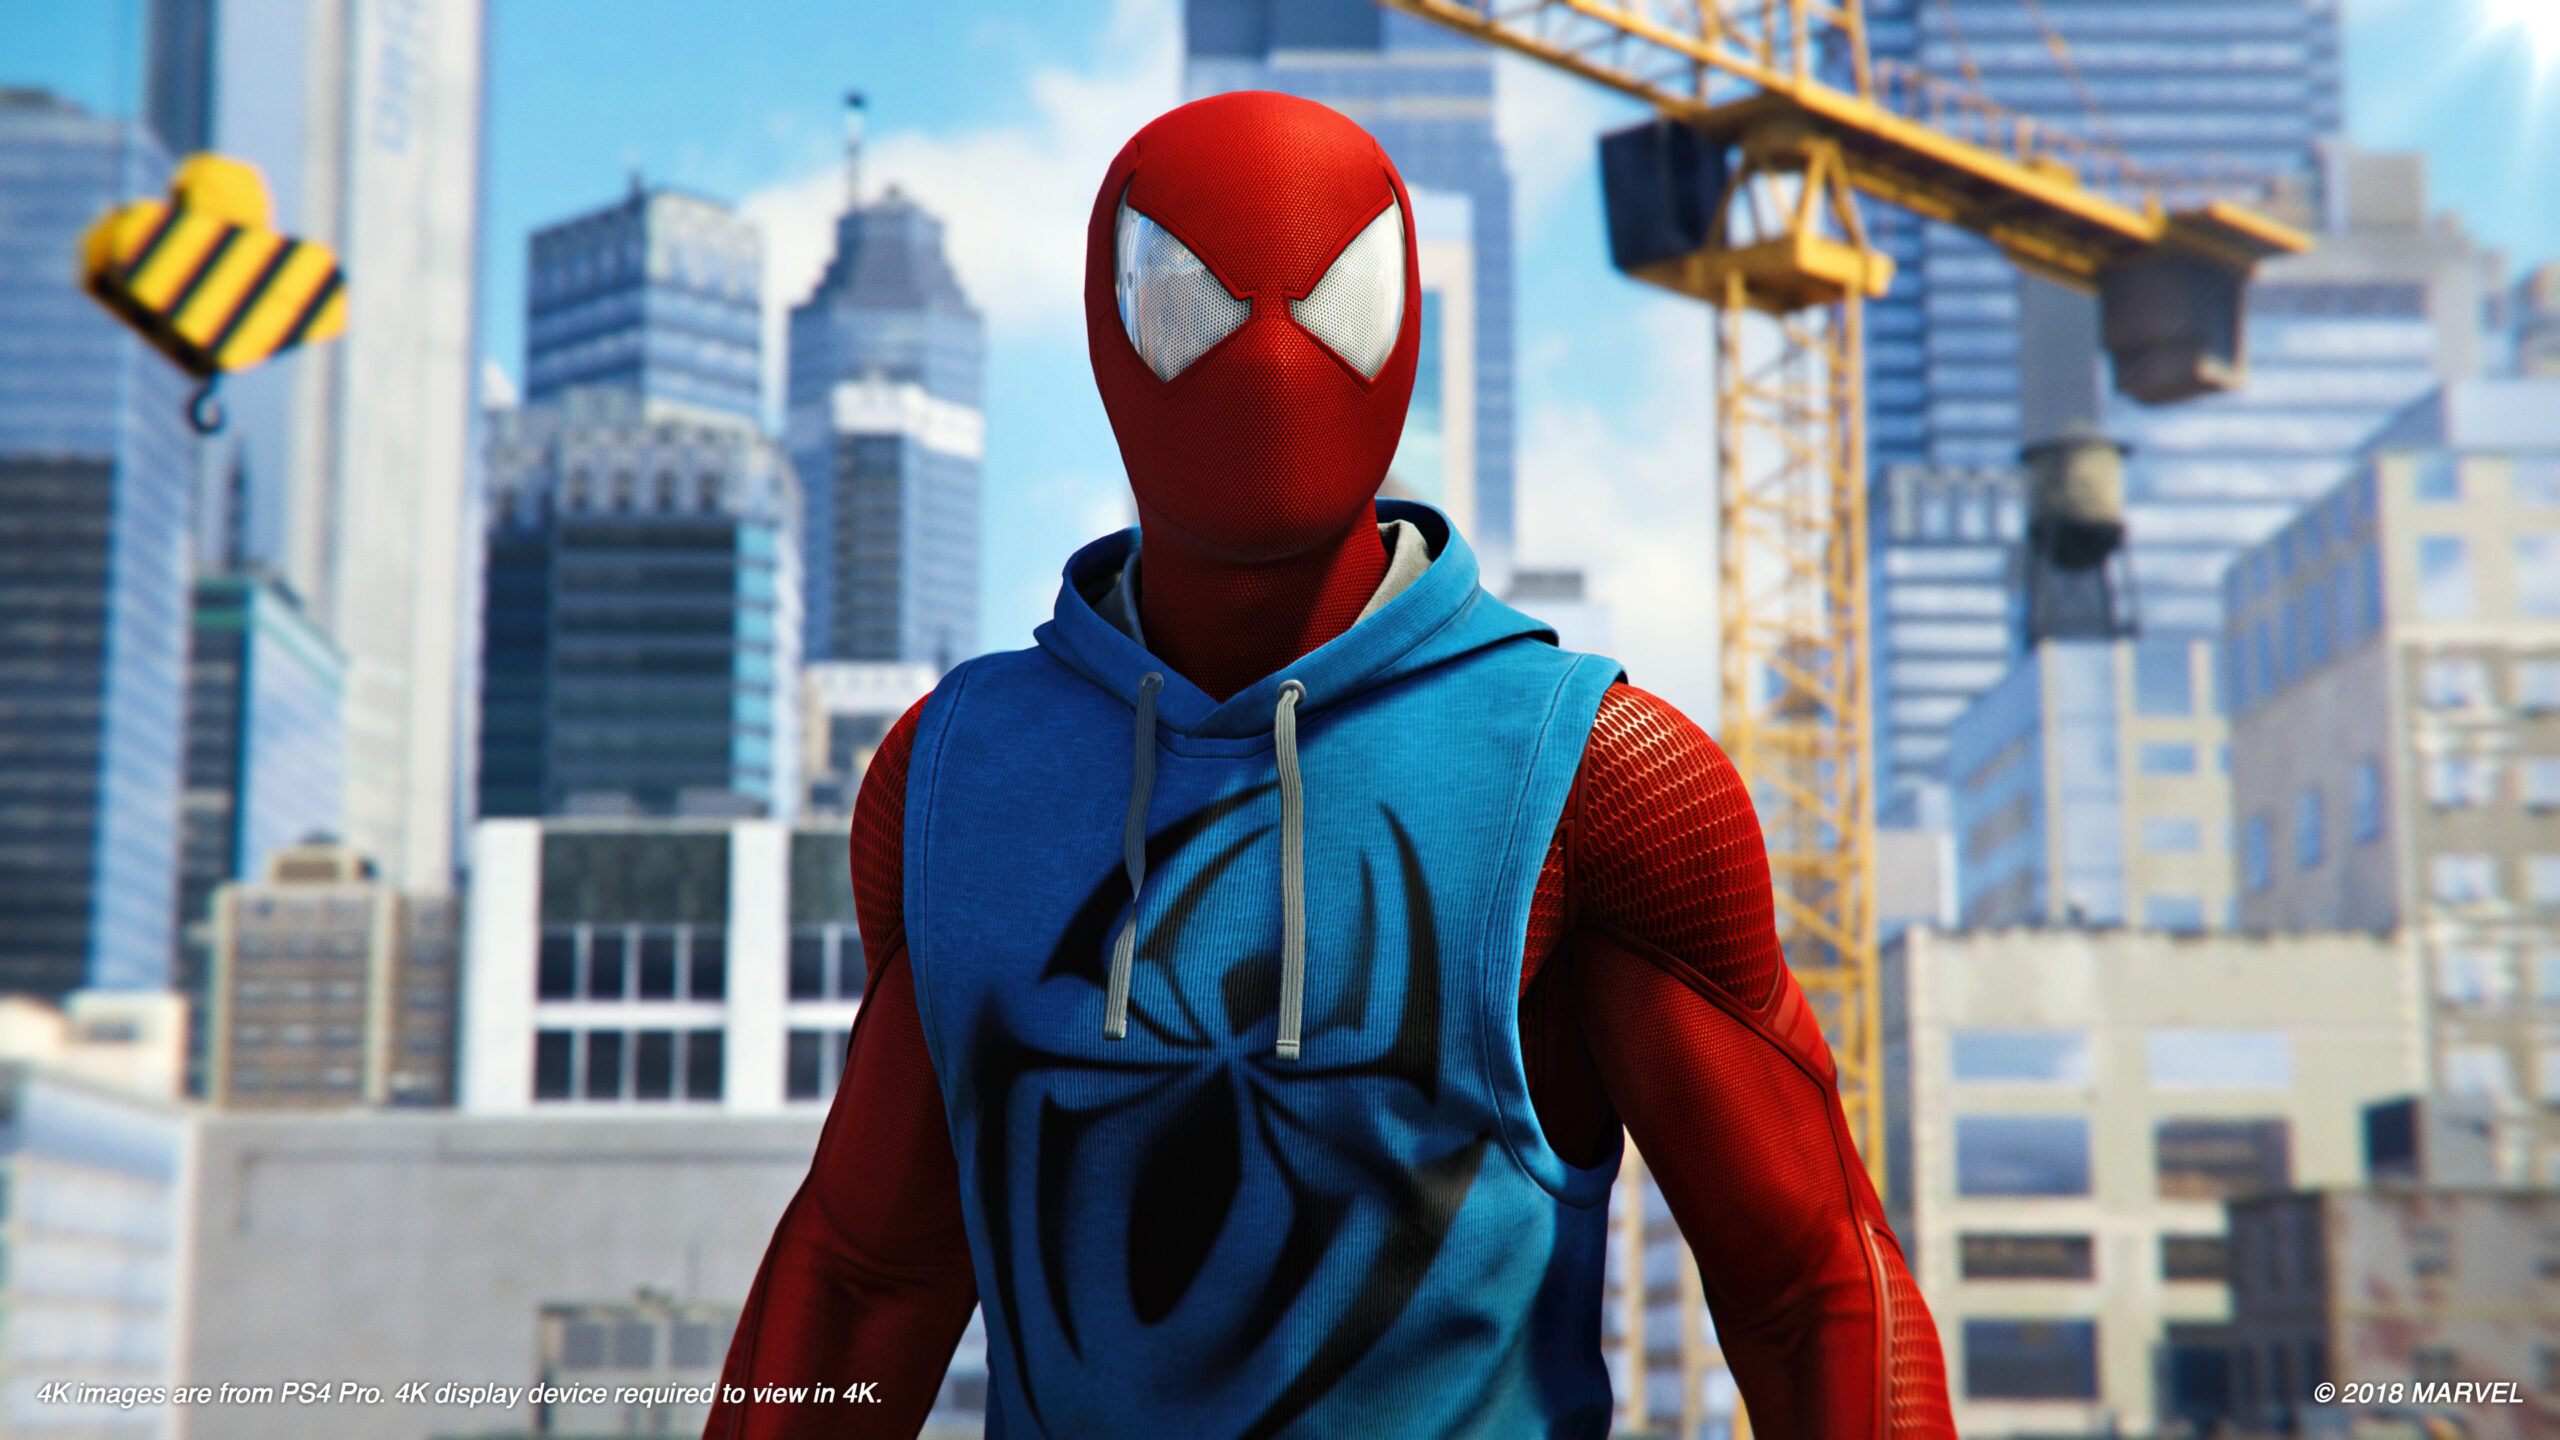 New game plus mode will be swinging over to Spider-Man in the future